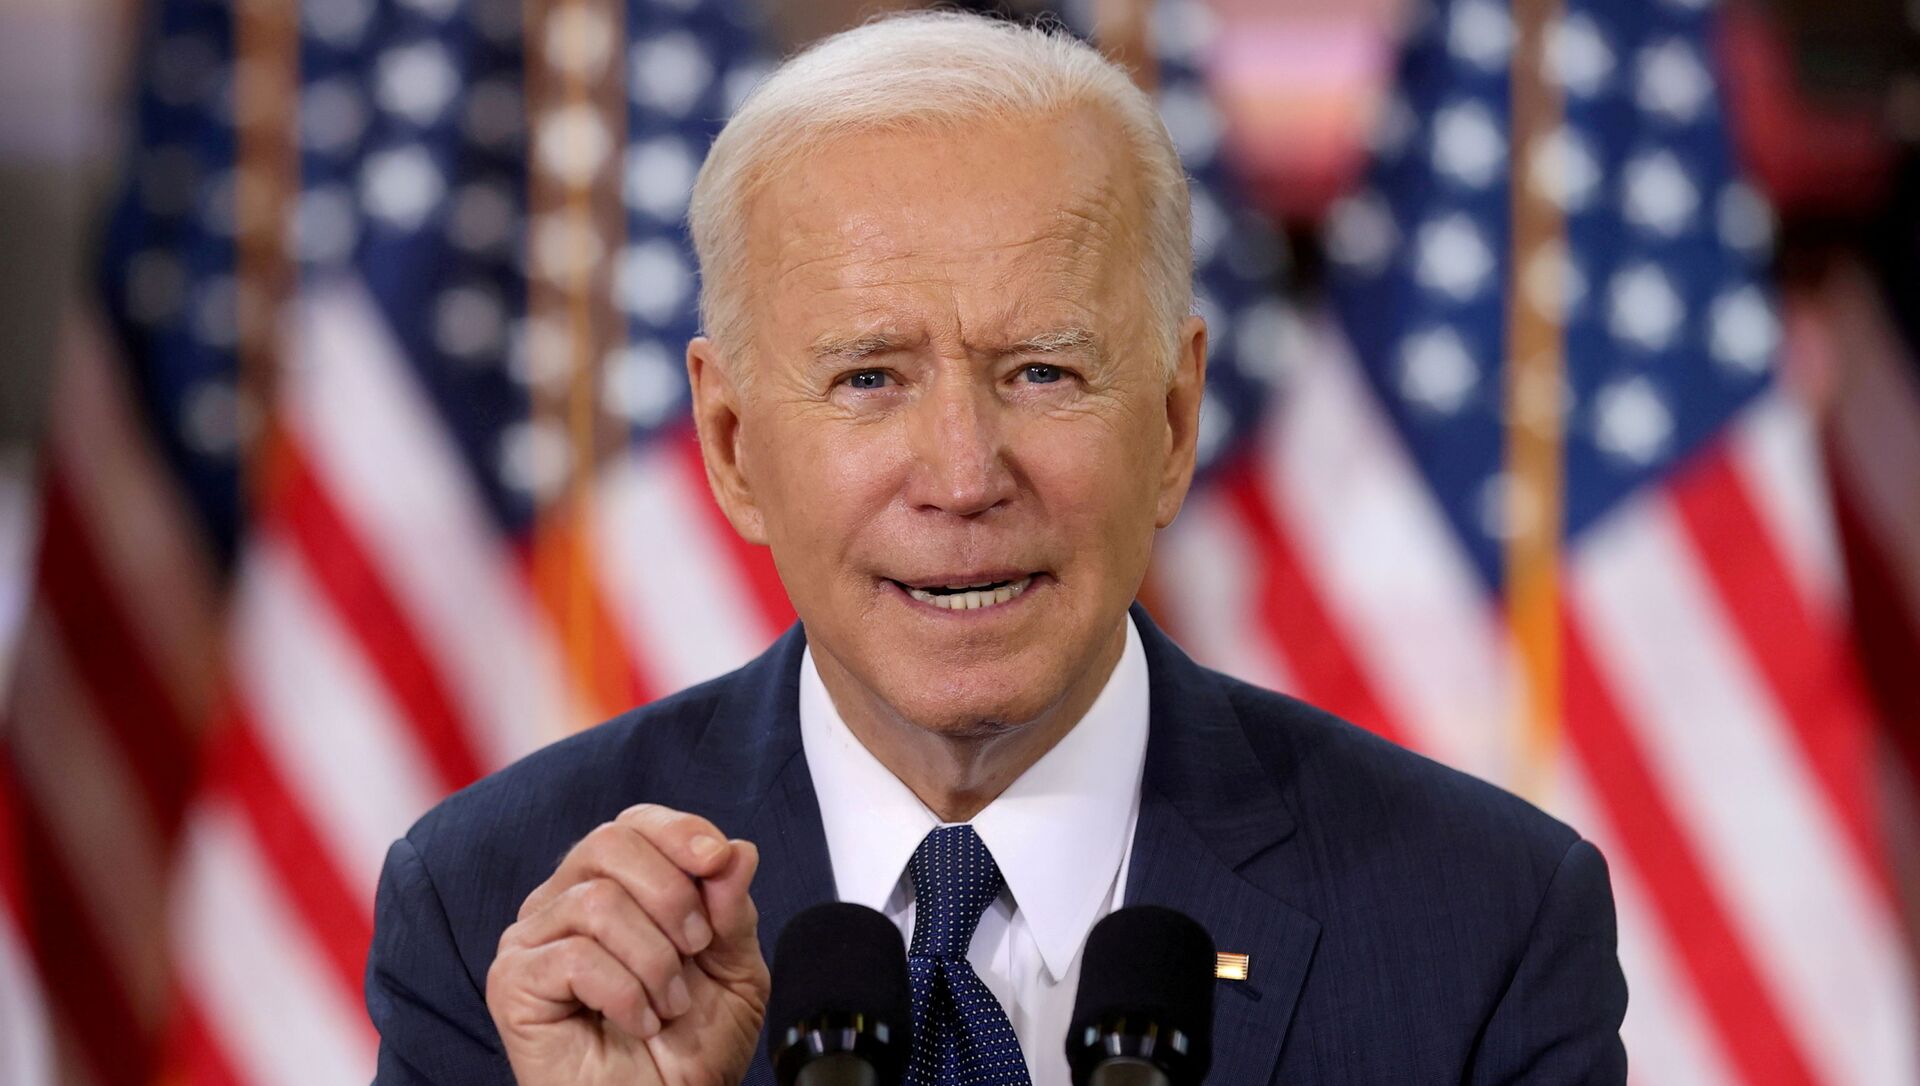 FILE PHOTO: U.S. President Joe Biden speaks about his infrastructure plan during an event to tout the plan at Carpenters Pittsburgh Training Center in Pittsburgh, Pennsylvania, U.S., March 31, 2021.  - Sputnik International, 1920, 30.04.2021